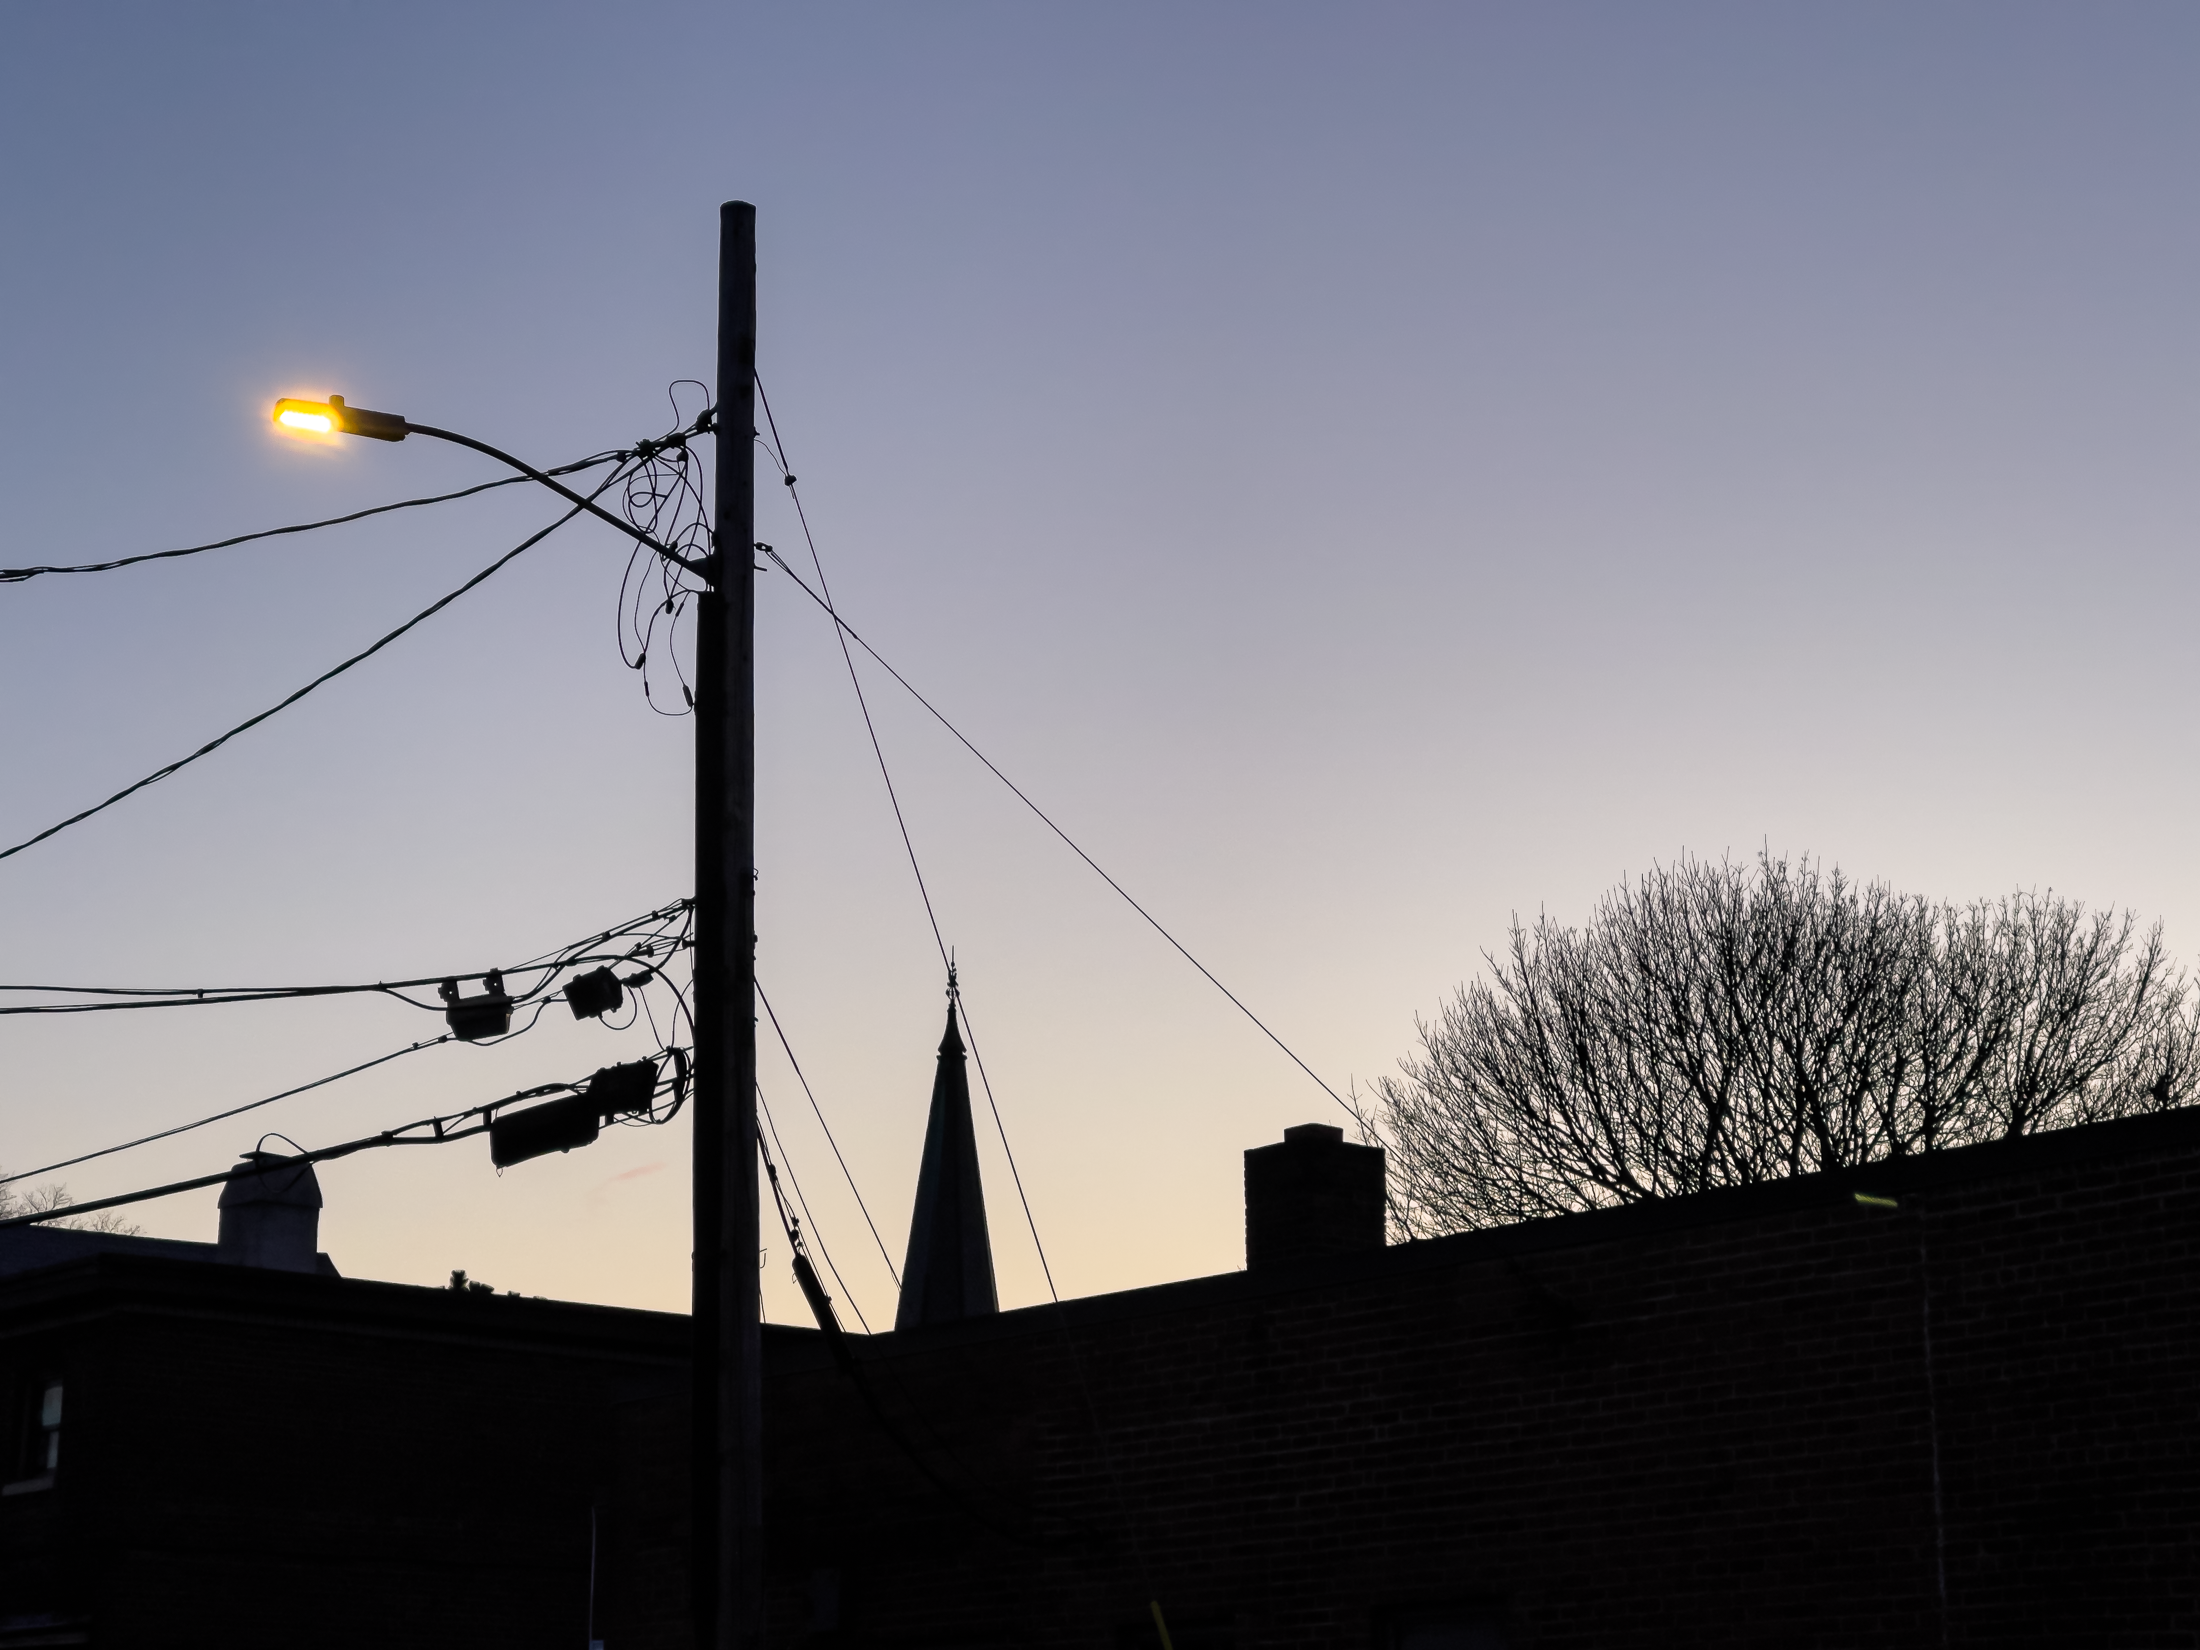 Building, streetlight, utility pole, wires and church steeple silhouetted against the morning sky.